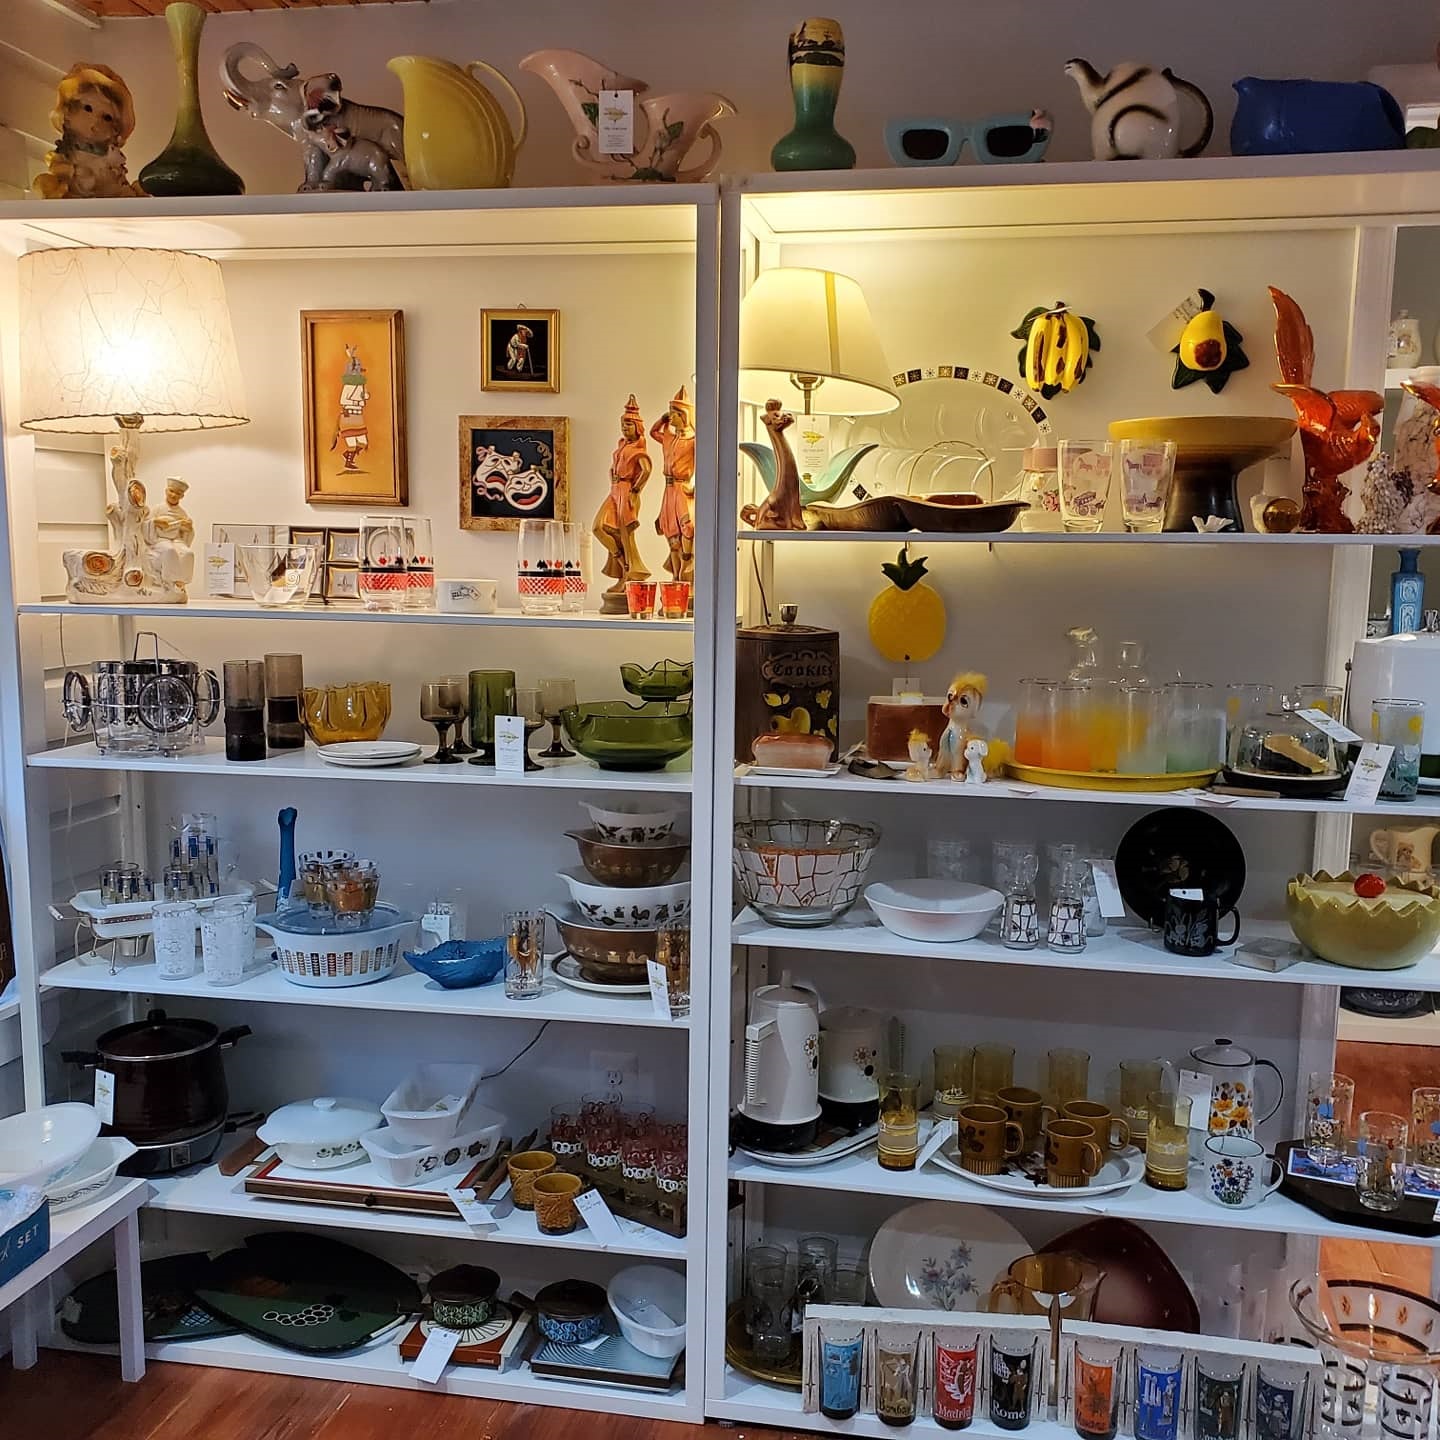 Vintage Dishware and Household items